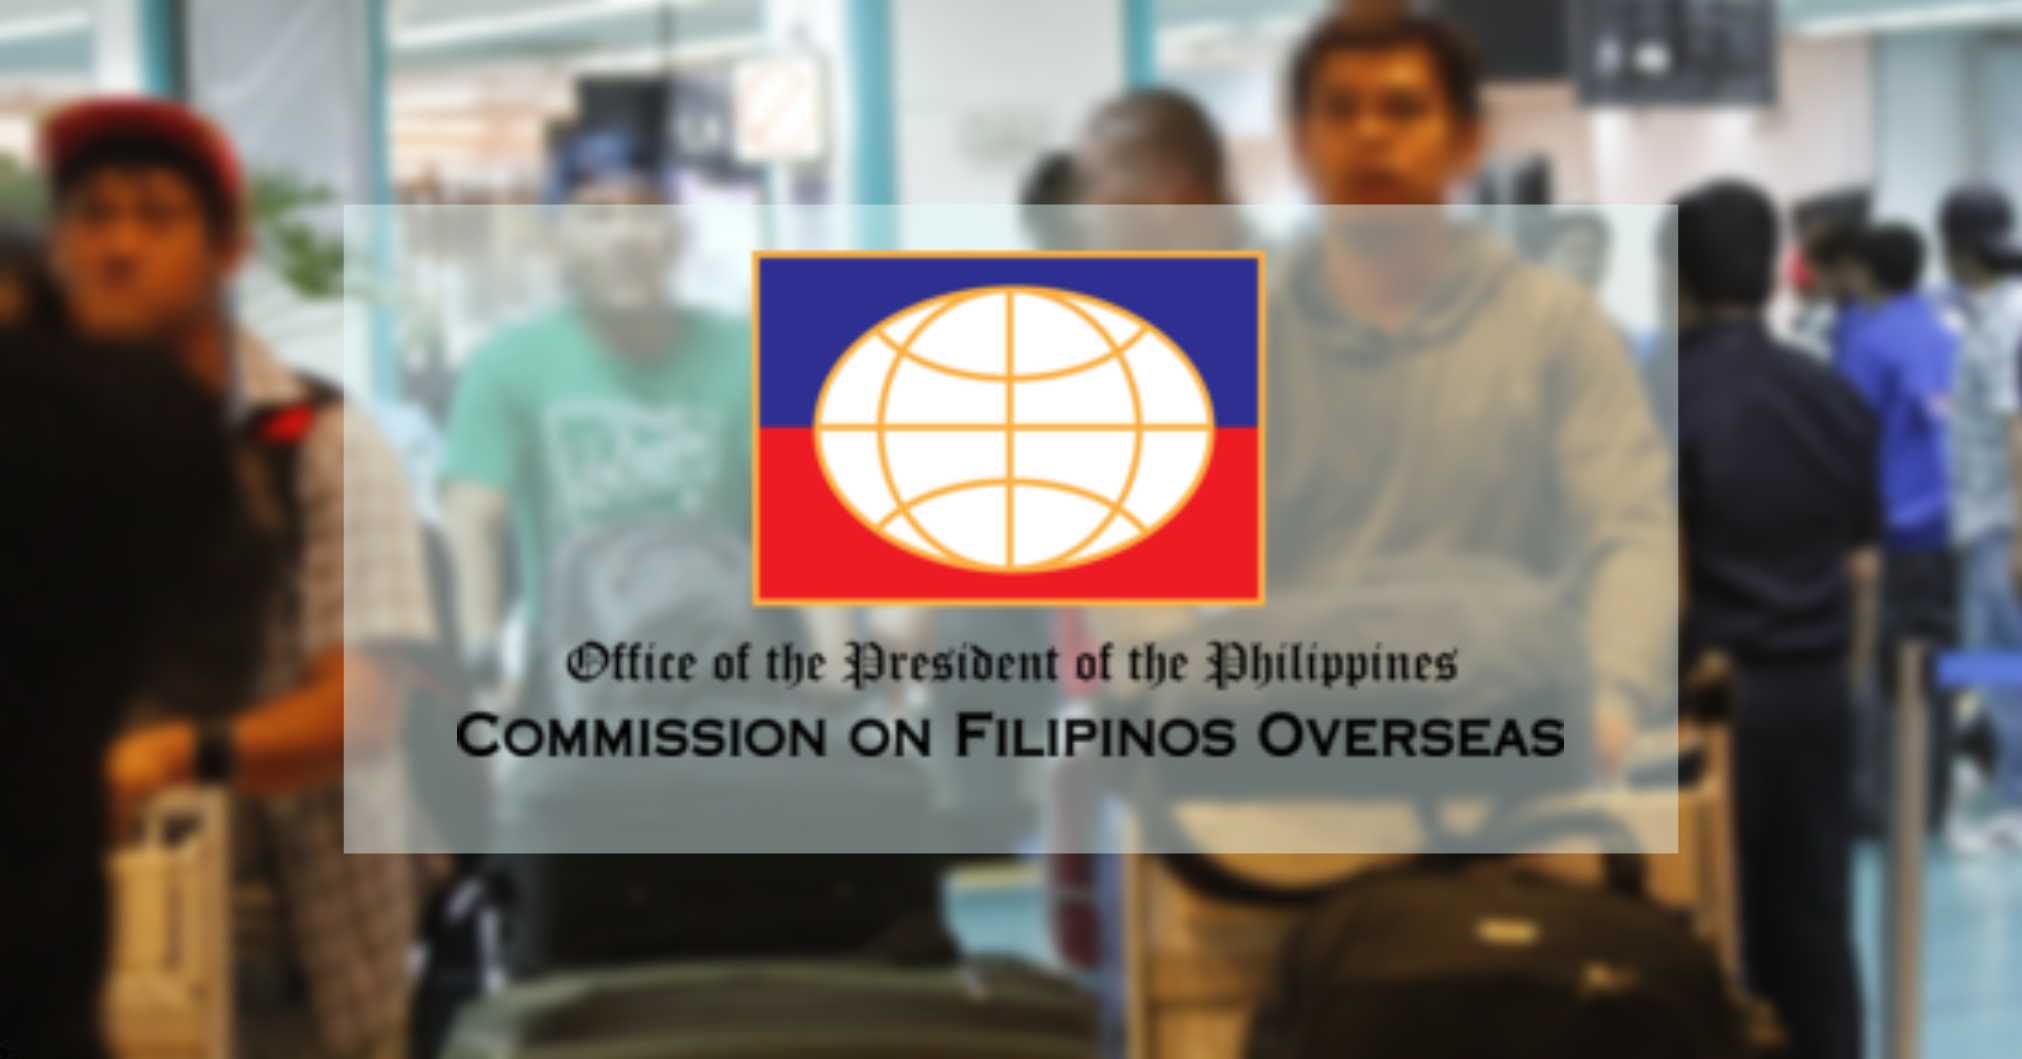 CFO: What You Need to Know about the Commission of Filipinos Overseas